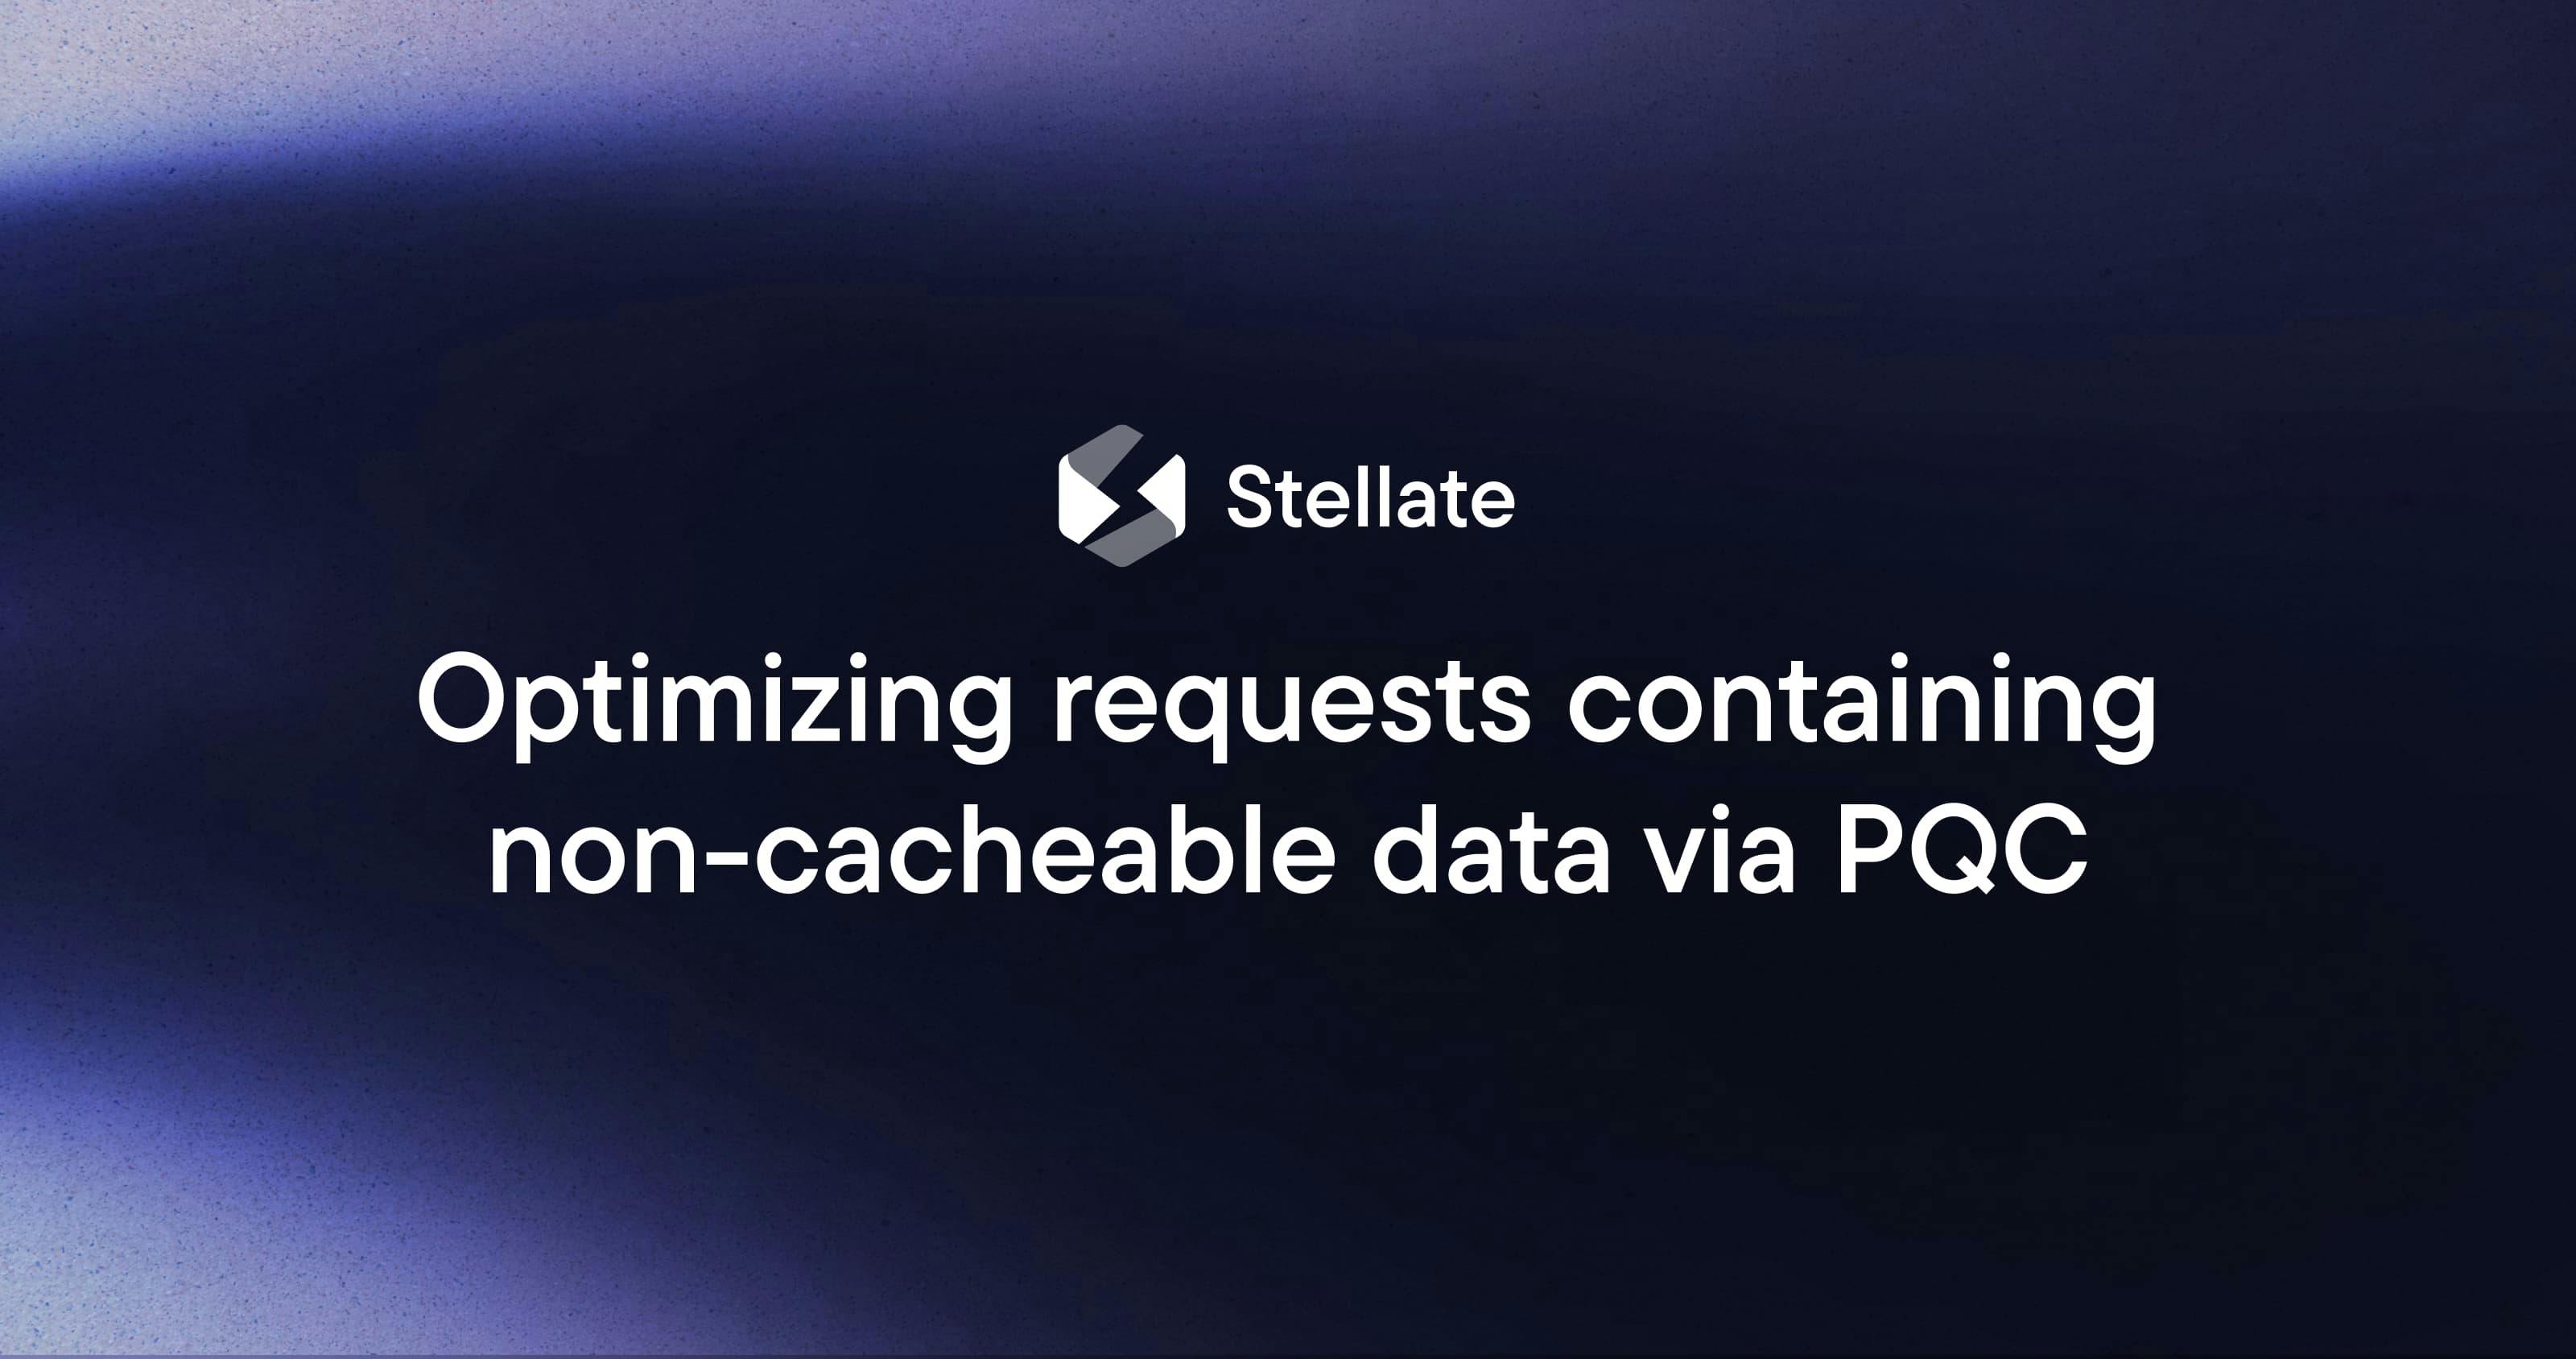 Cache requests containing non-cacheable data with PQC